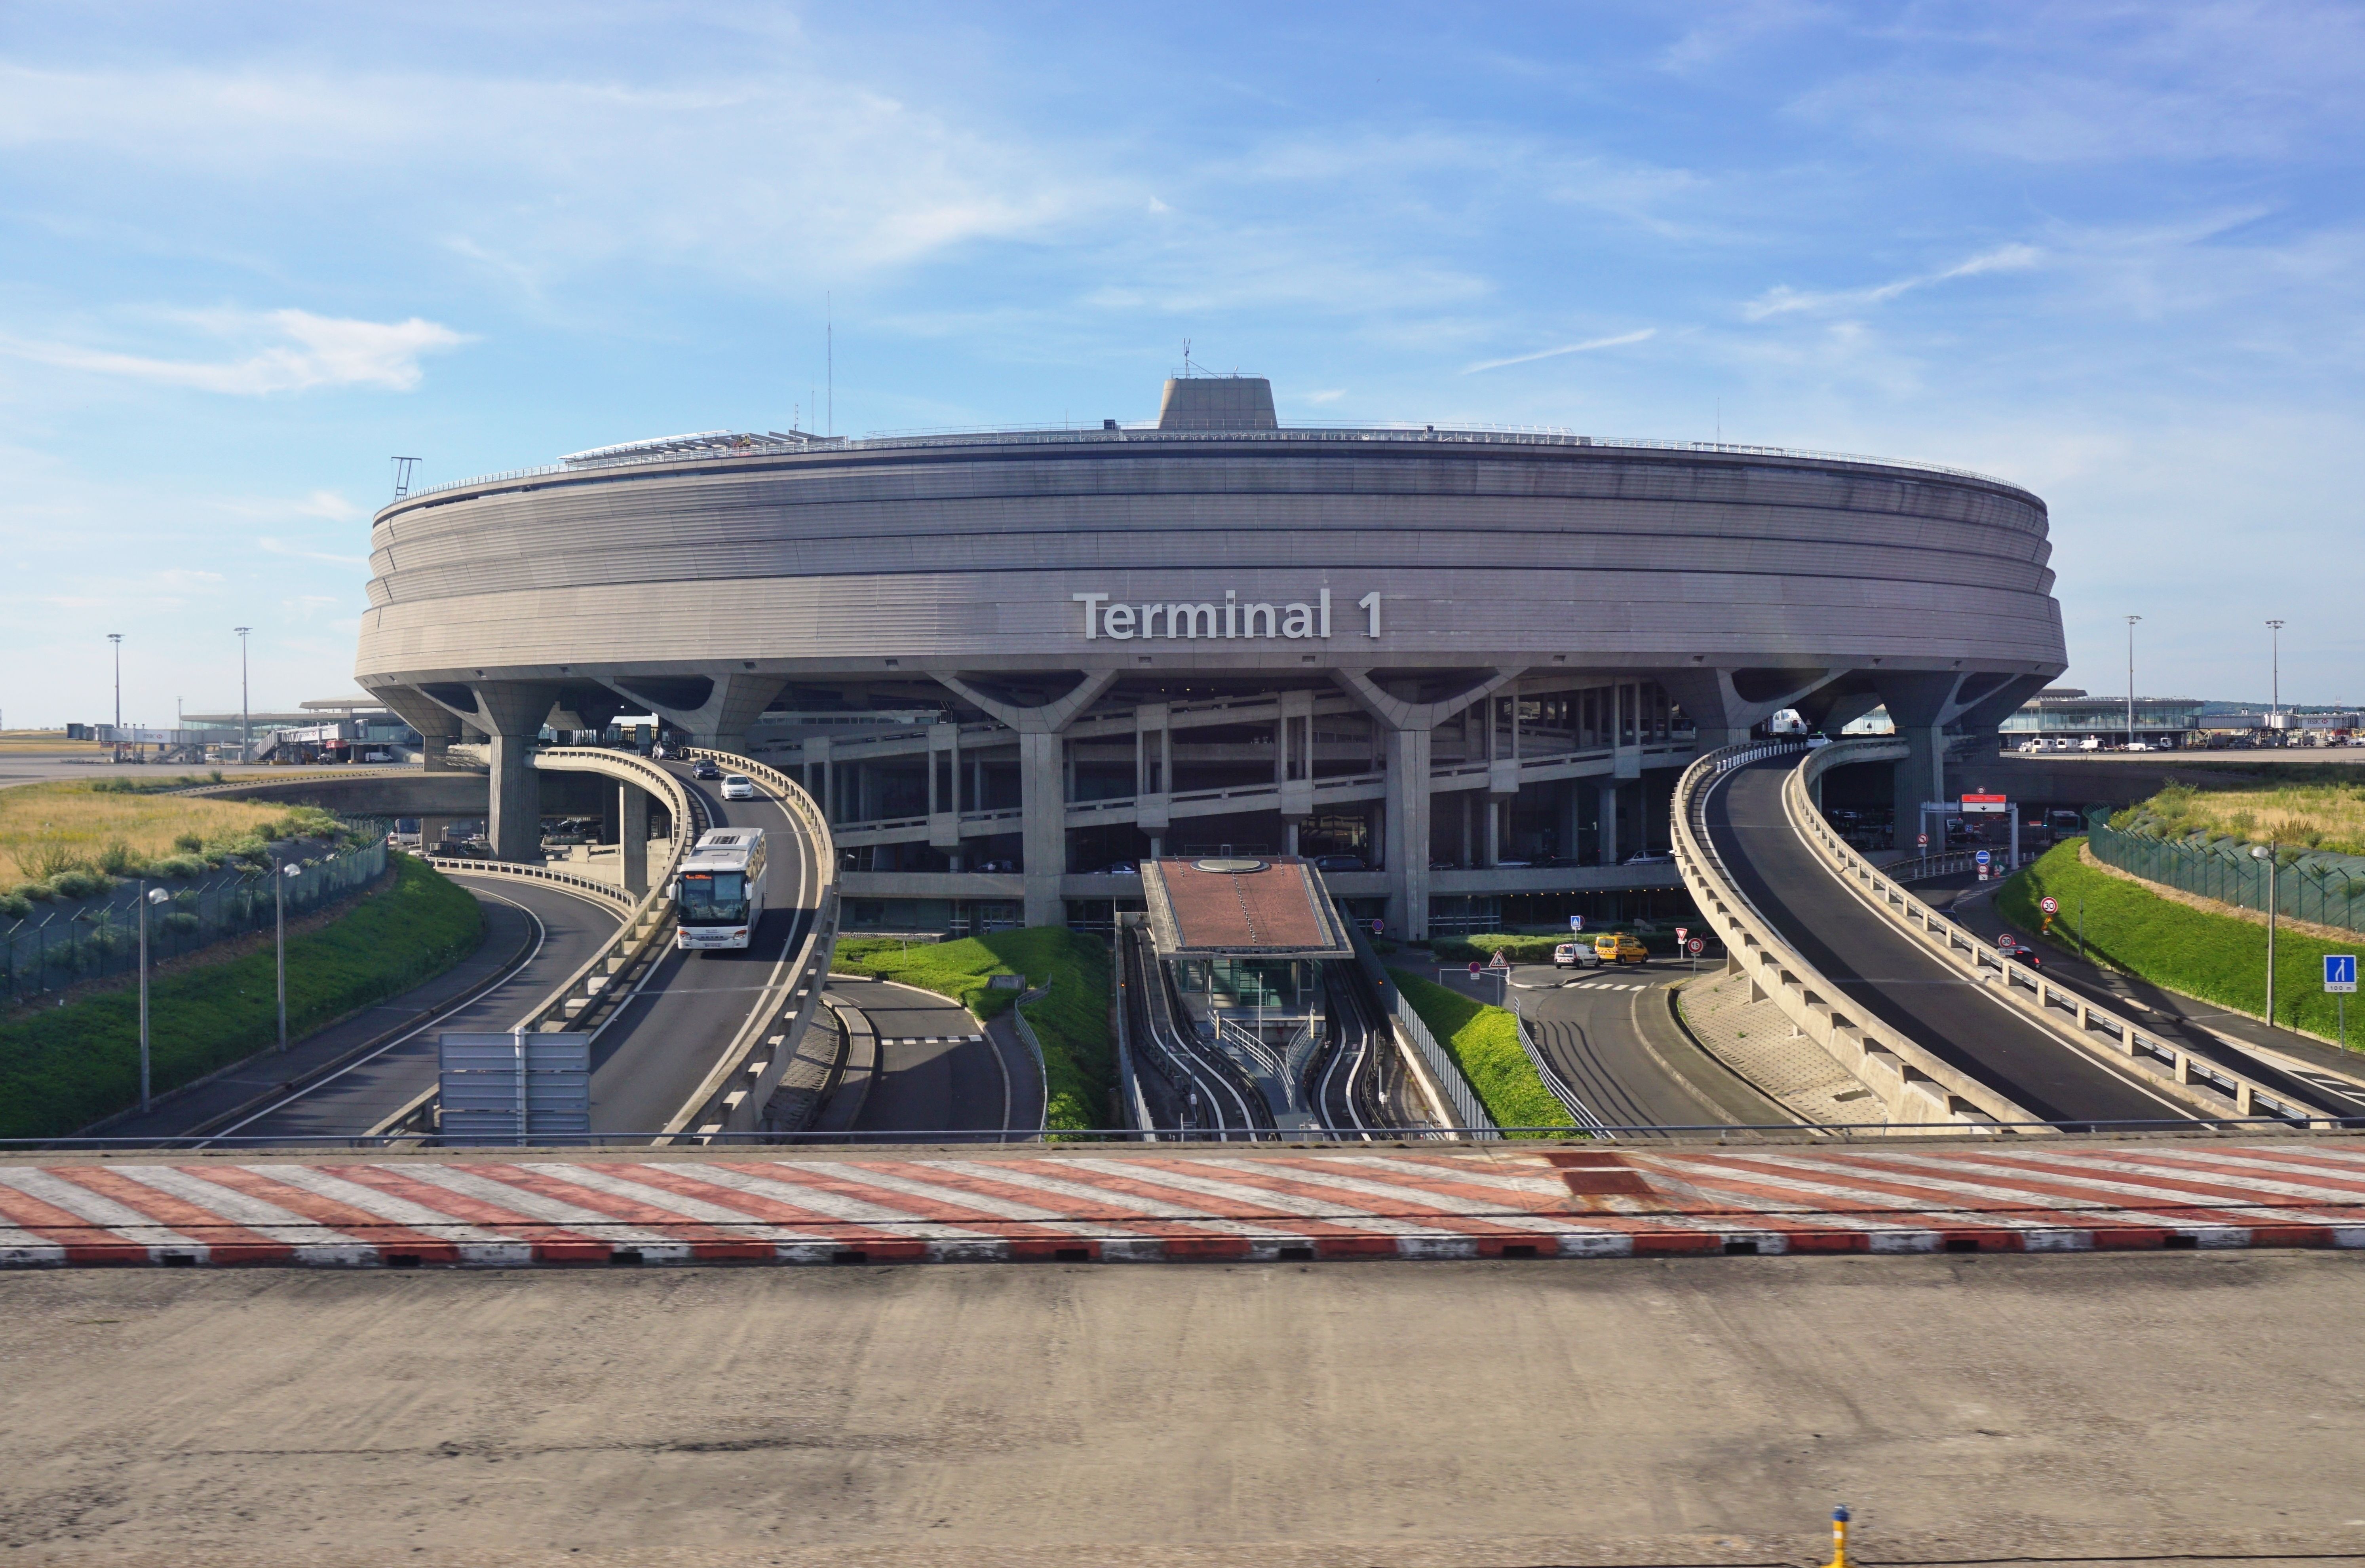 Paris Charles de Gaulle Airport - Part 1 - A Visual History of the World's  Great Airports